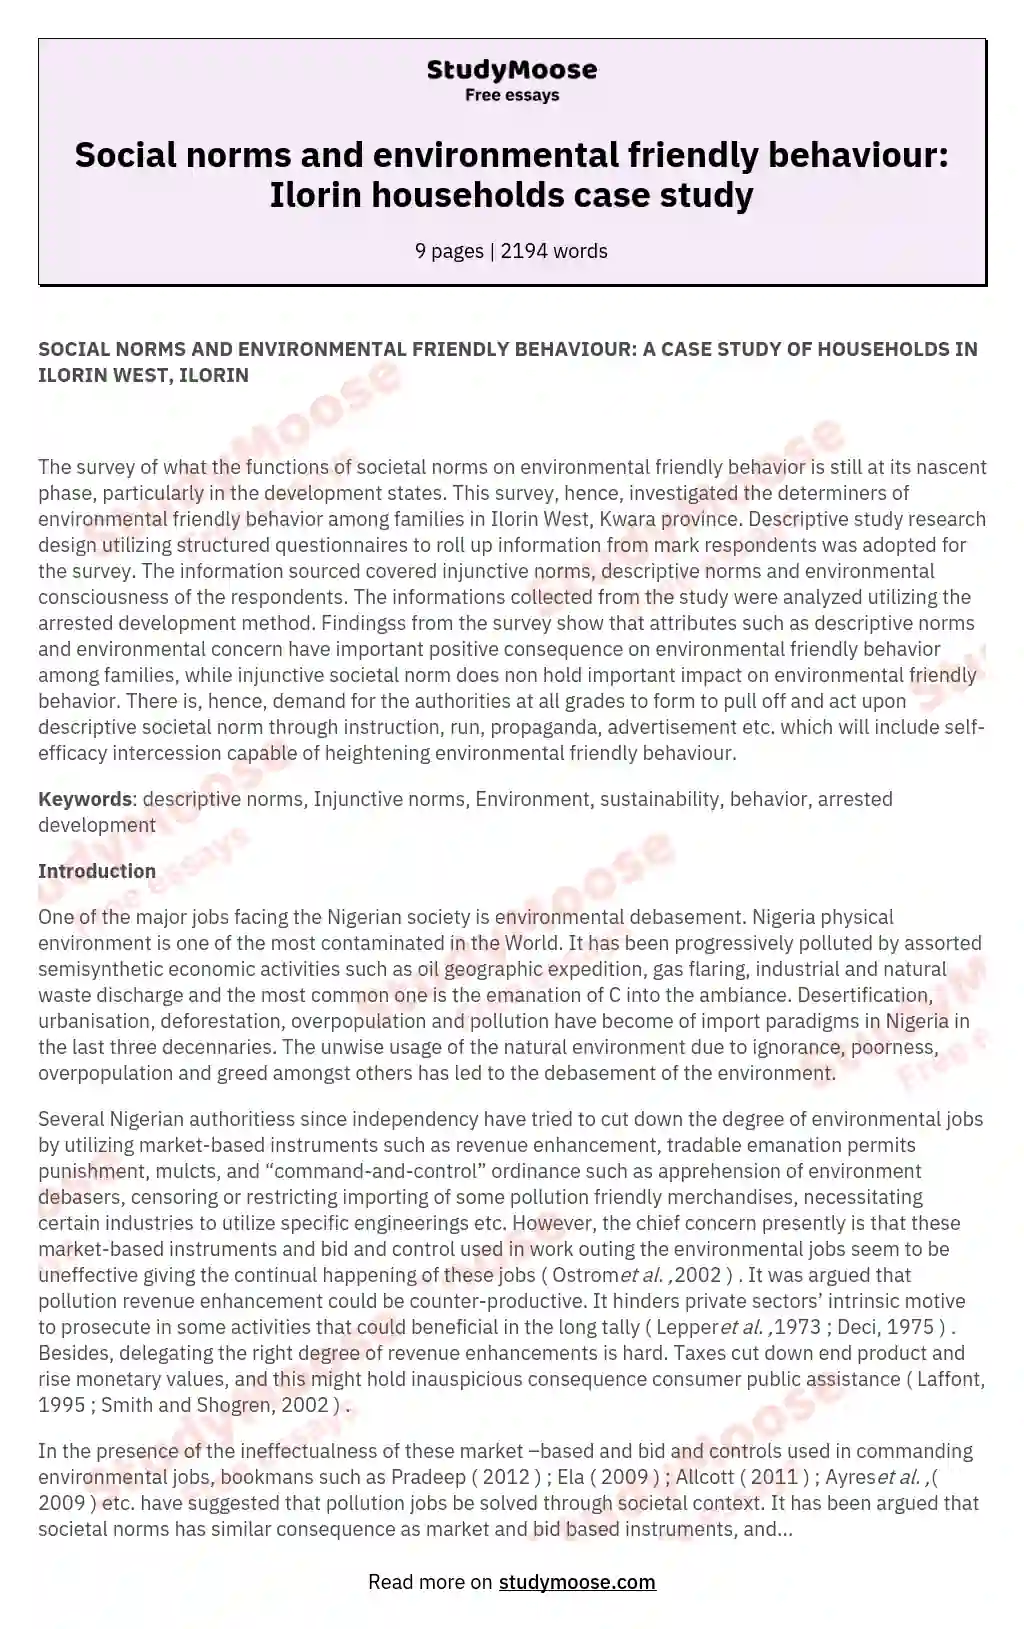 Social norms and environmental friendly behaviour: Ilorin households case study essay